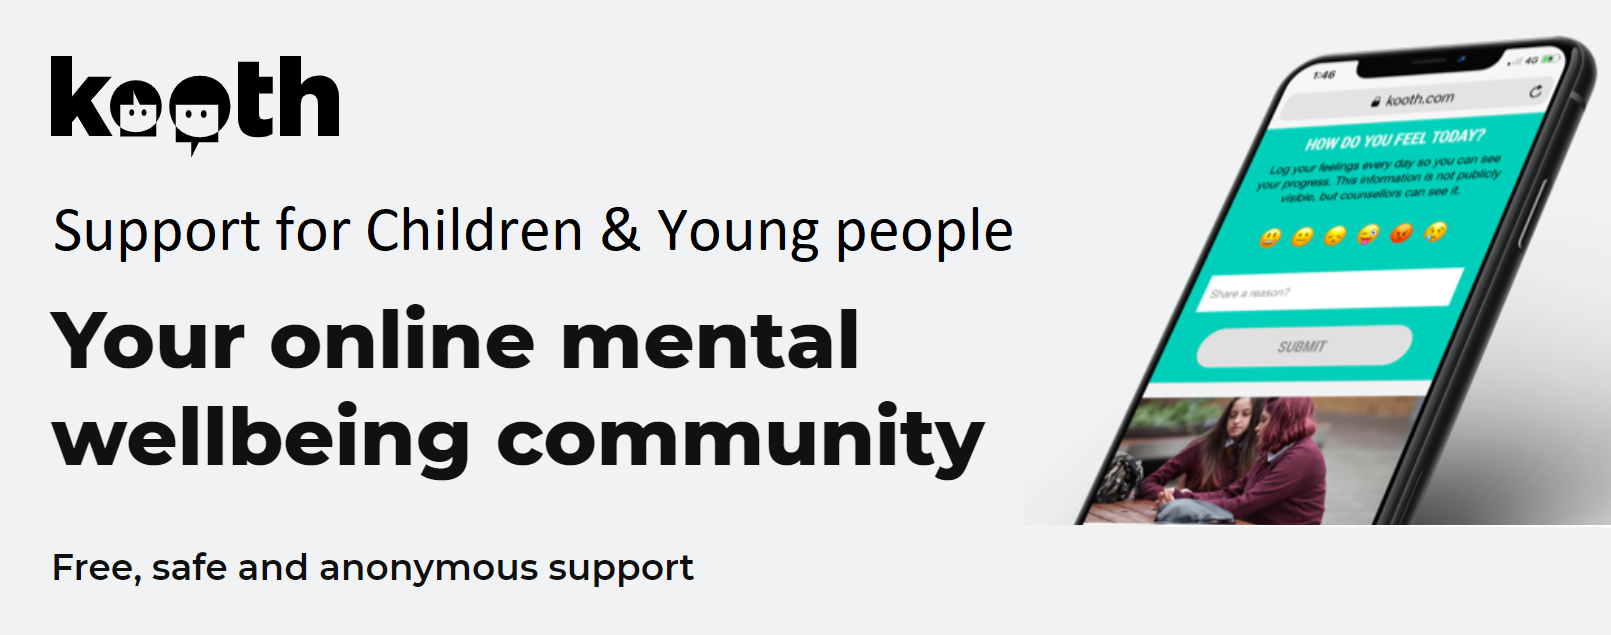 Kooth Online support for Children and young people